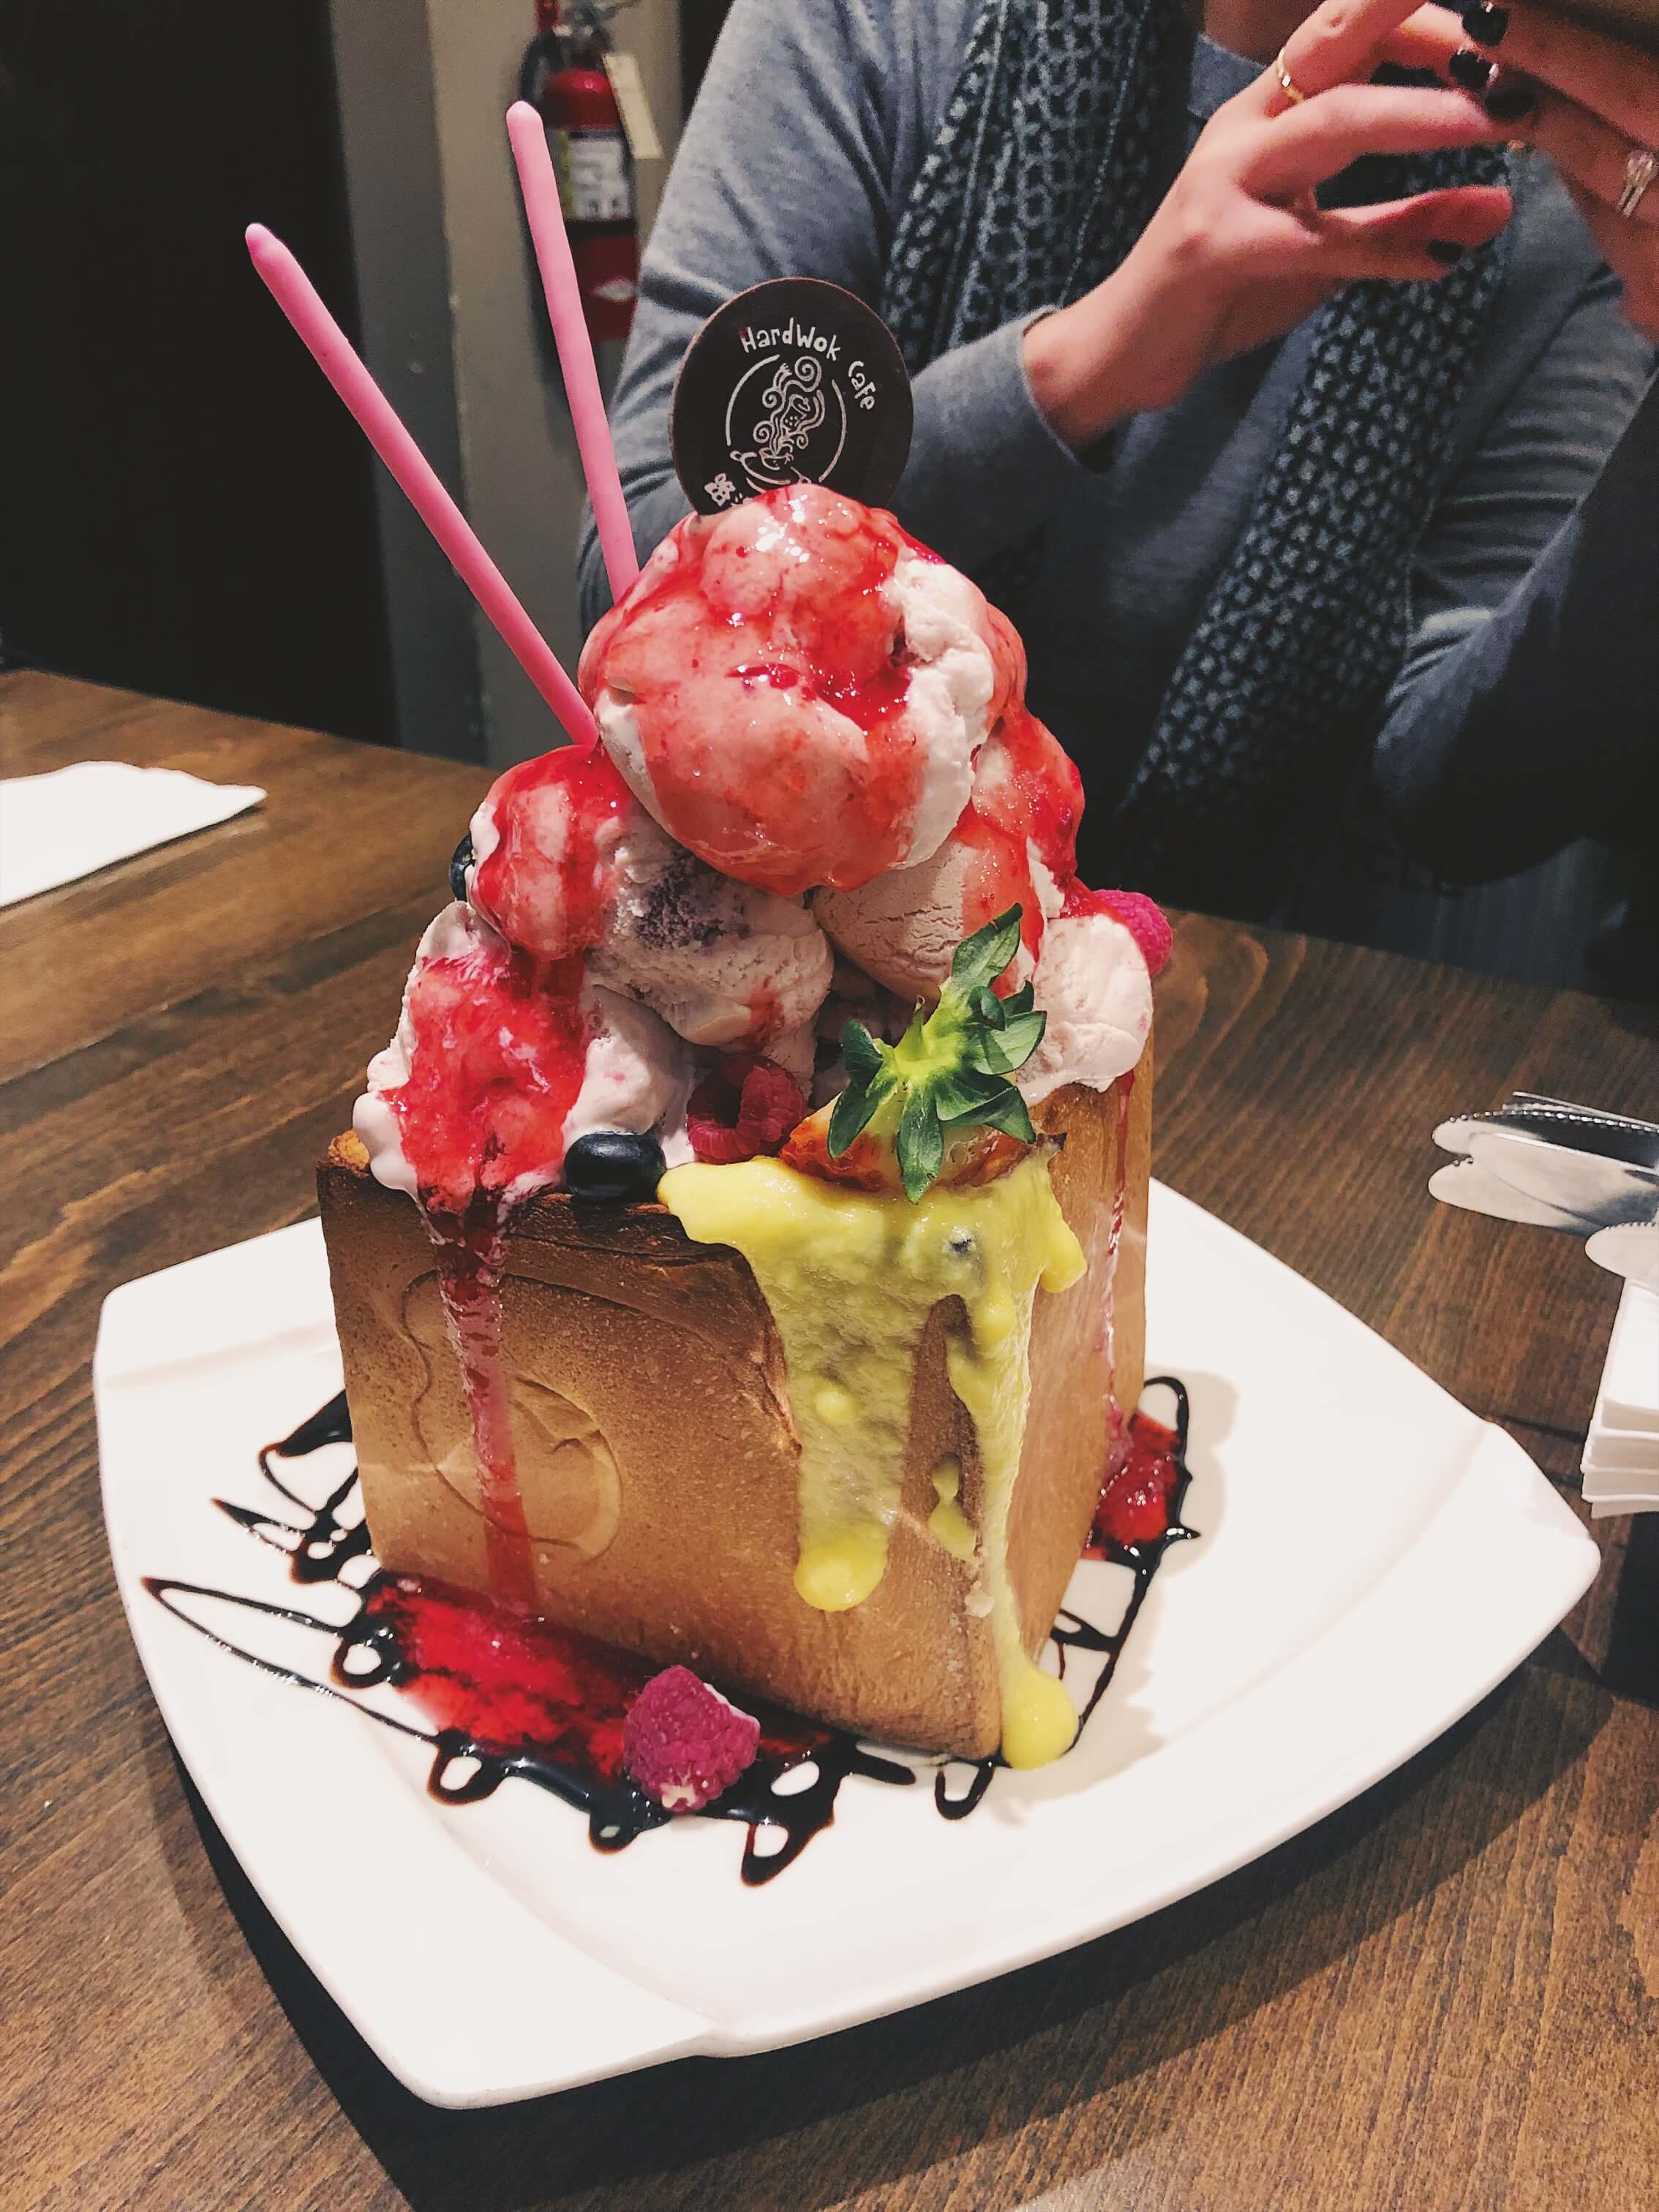 A HUGE chunk of honey
              toast topped with strawberries, ice cream, and a pocky stick.